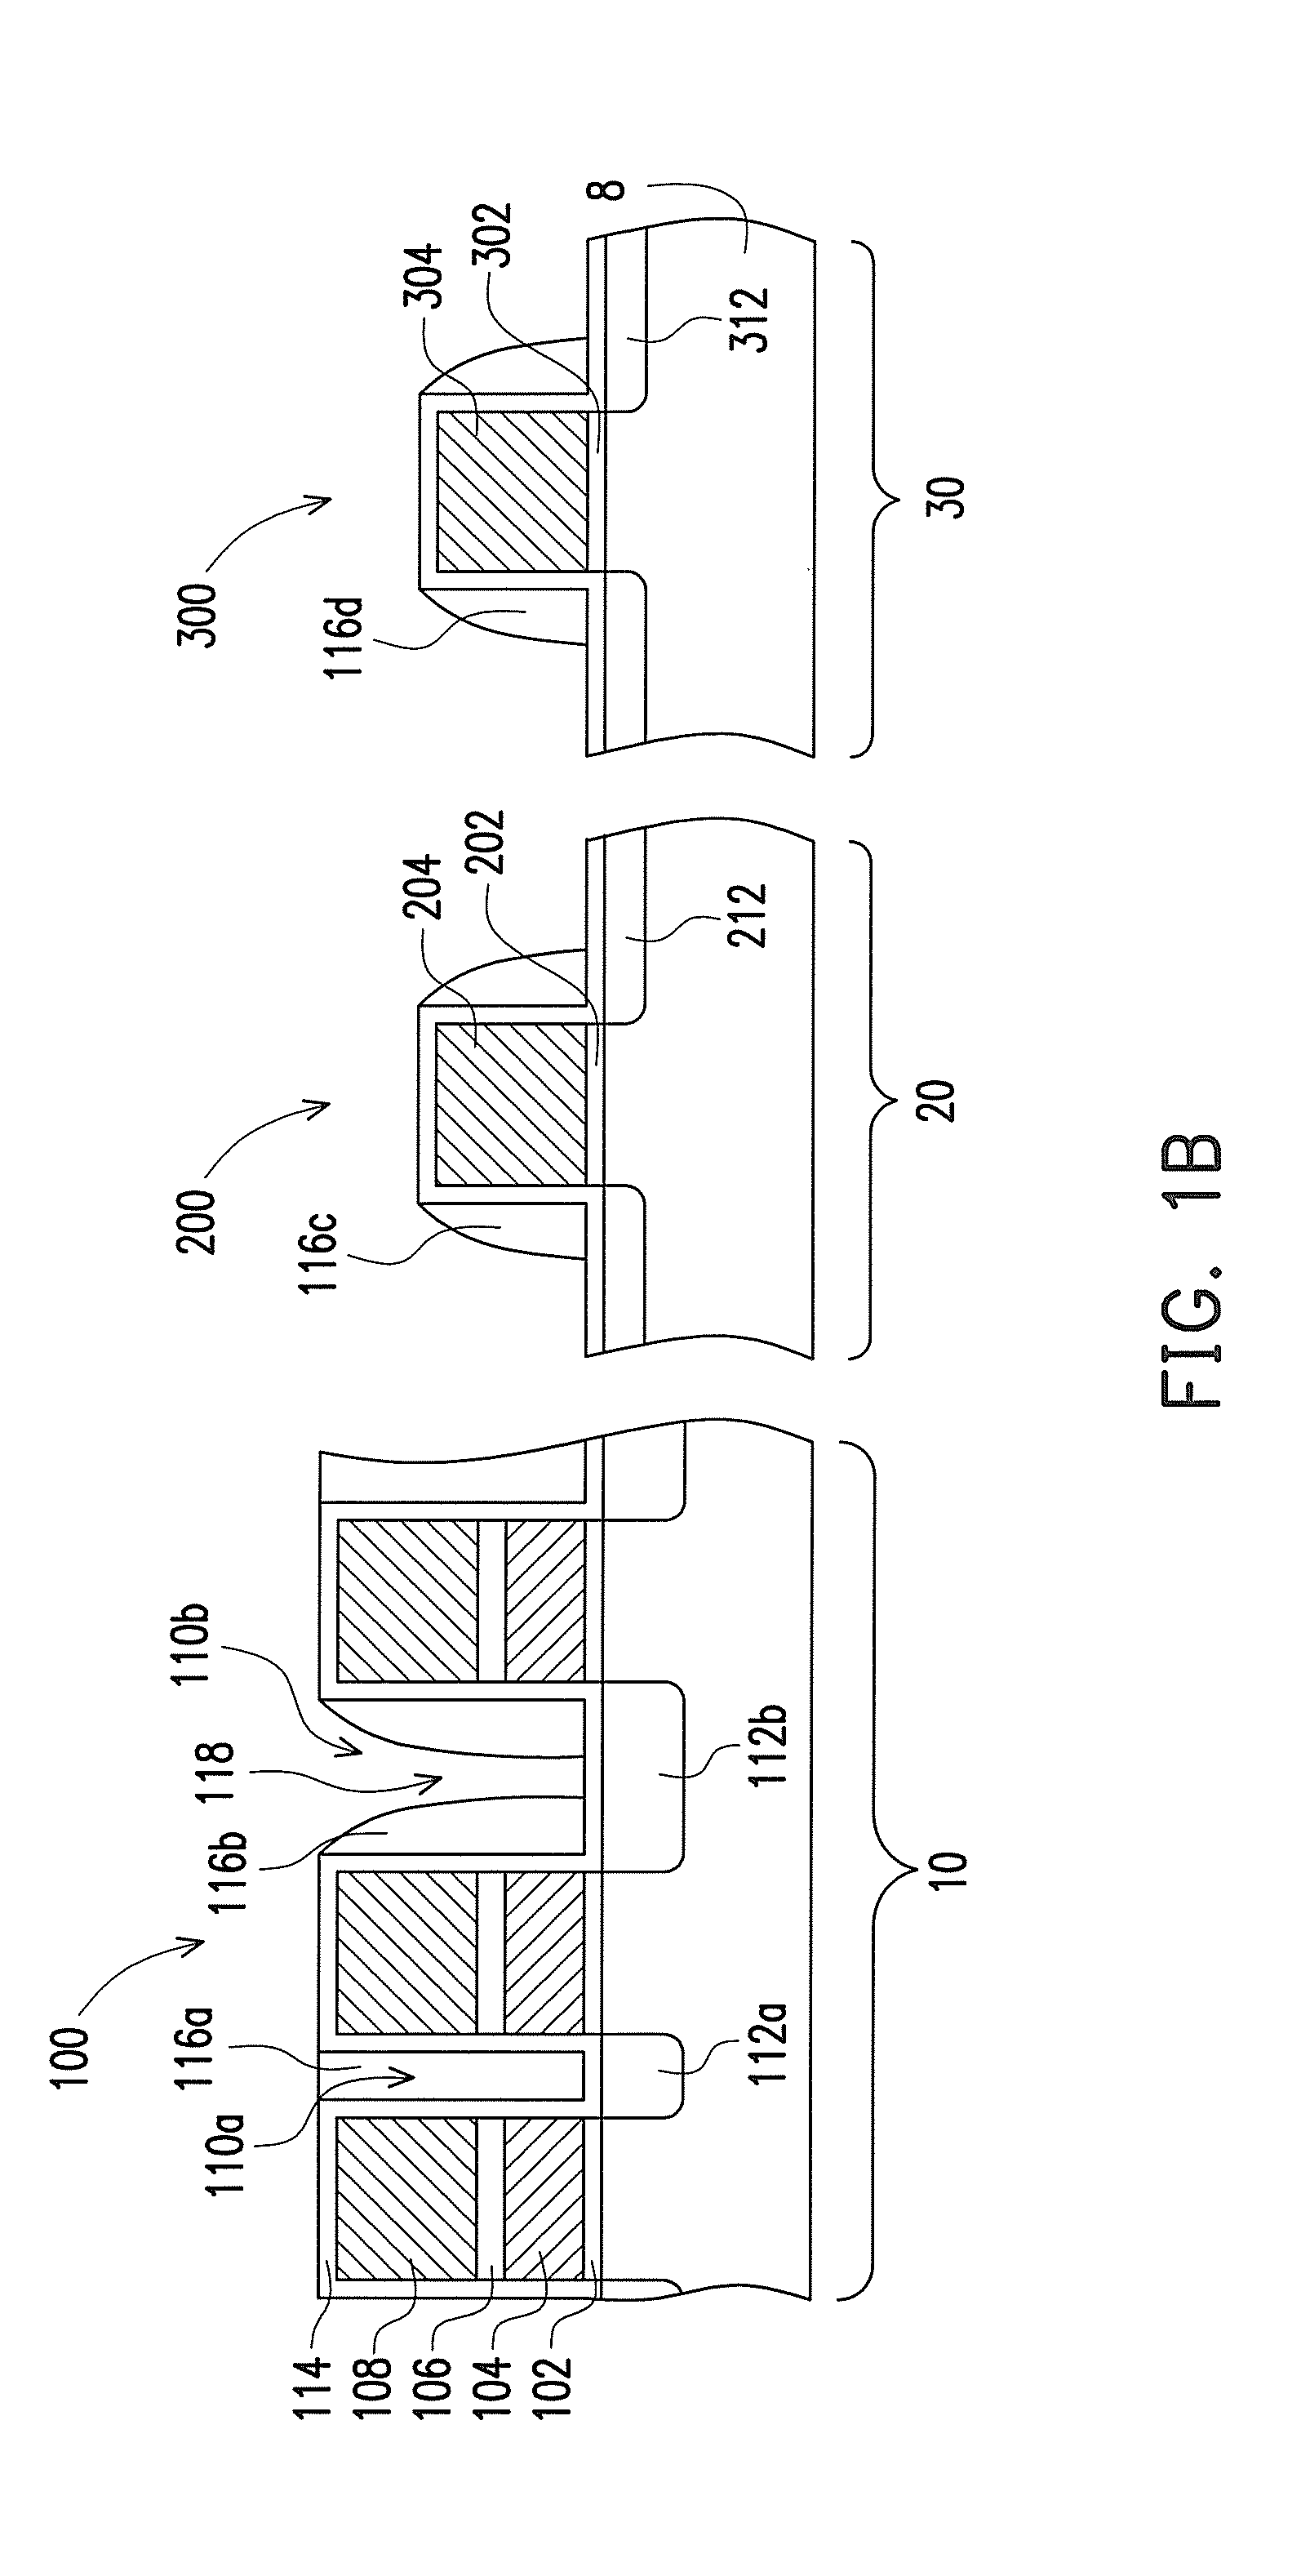 Semiconductor device and a method of fabricating the same